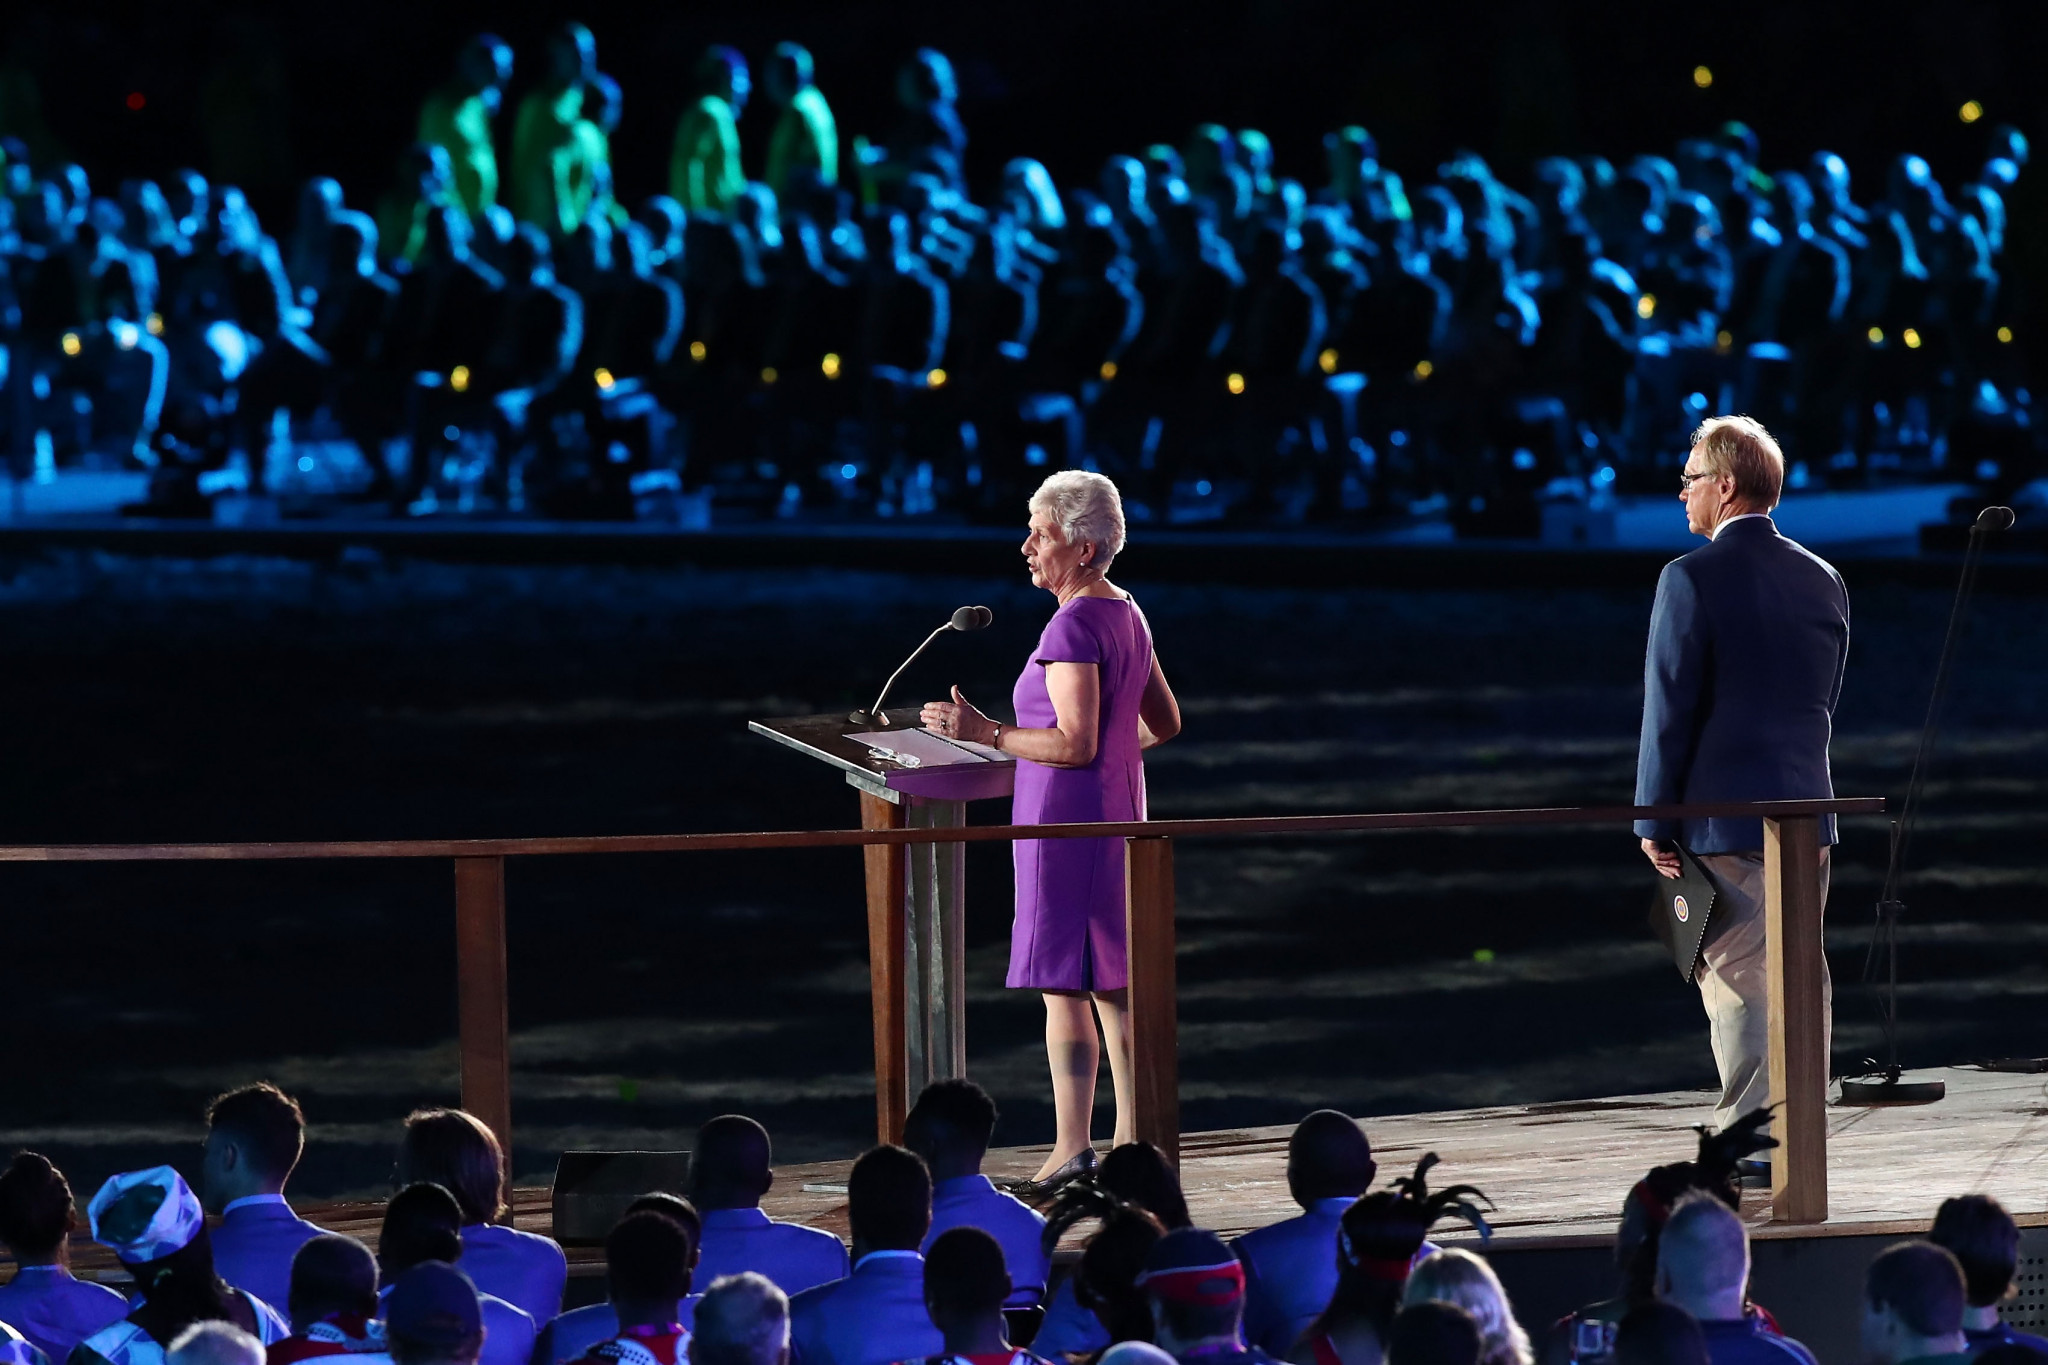 CGF President Louise Martin described the 2018 Gold Coast Commonwealth Games as having a 